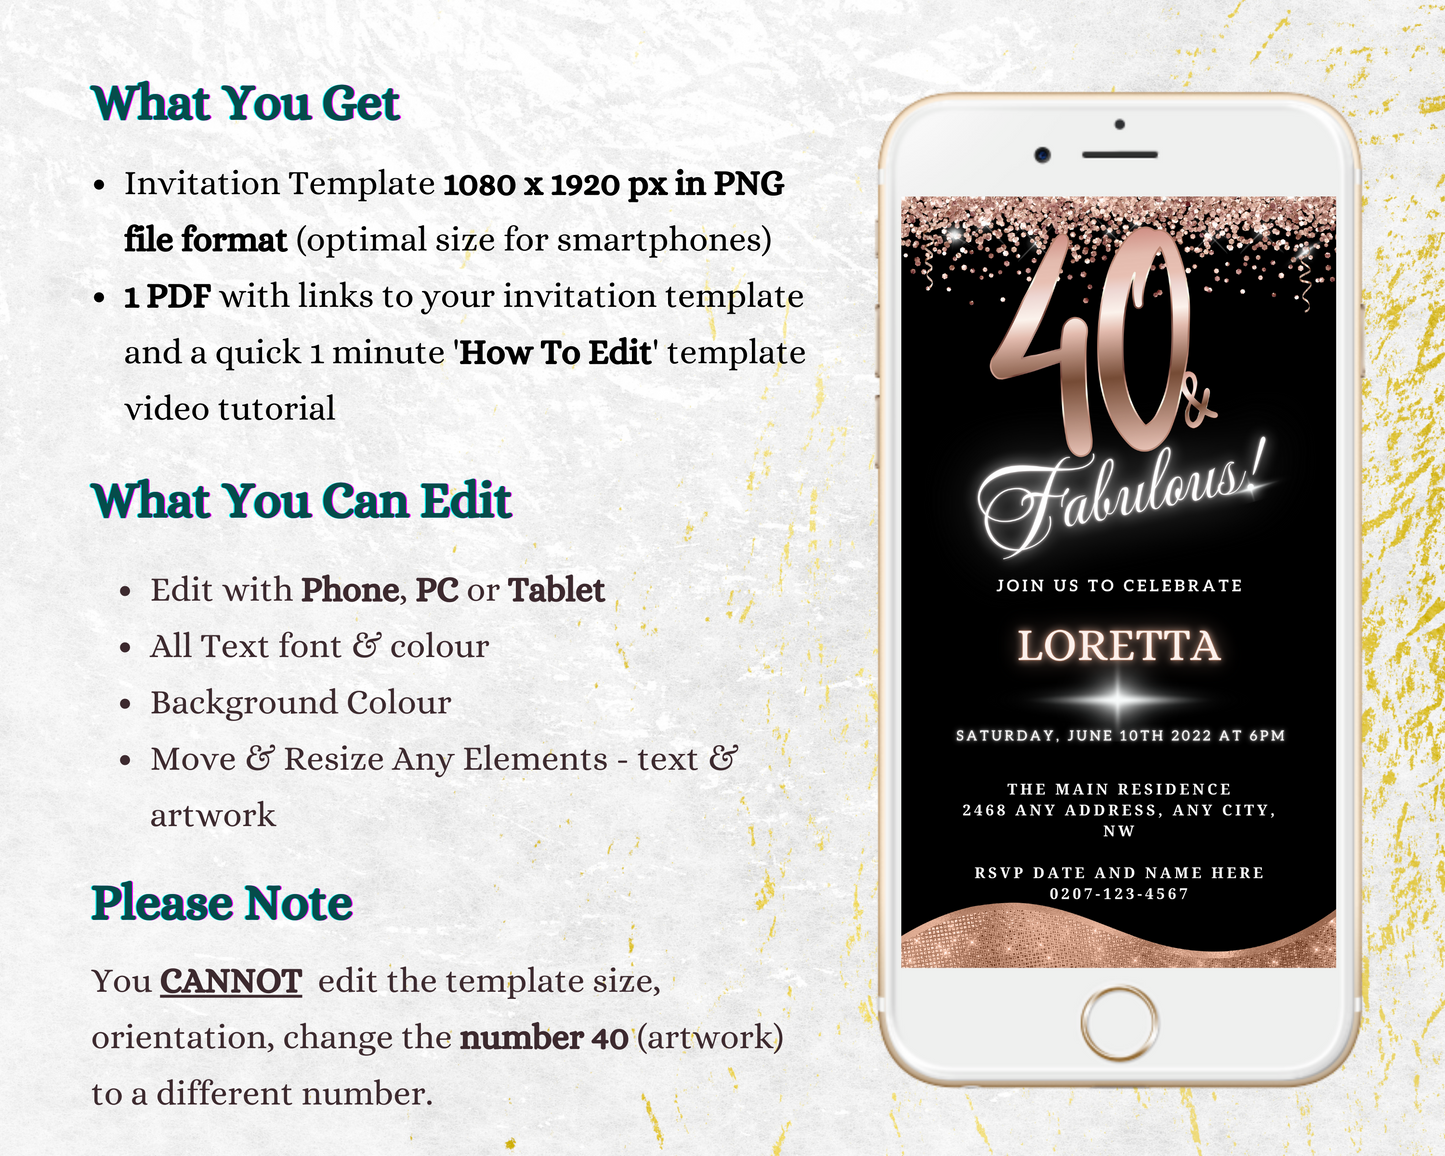 Rose Gold Glitter Black | 40 & Fabulous Party Evite displayed on a smartphone screen, showcasing editable text and event details for an eco-friendly digital invitation.